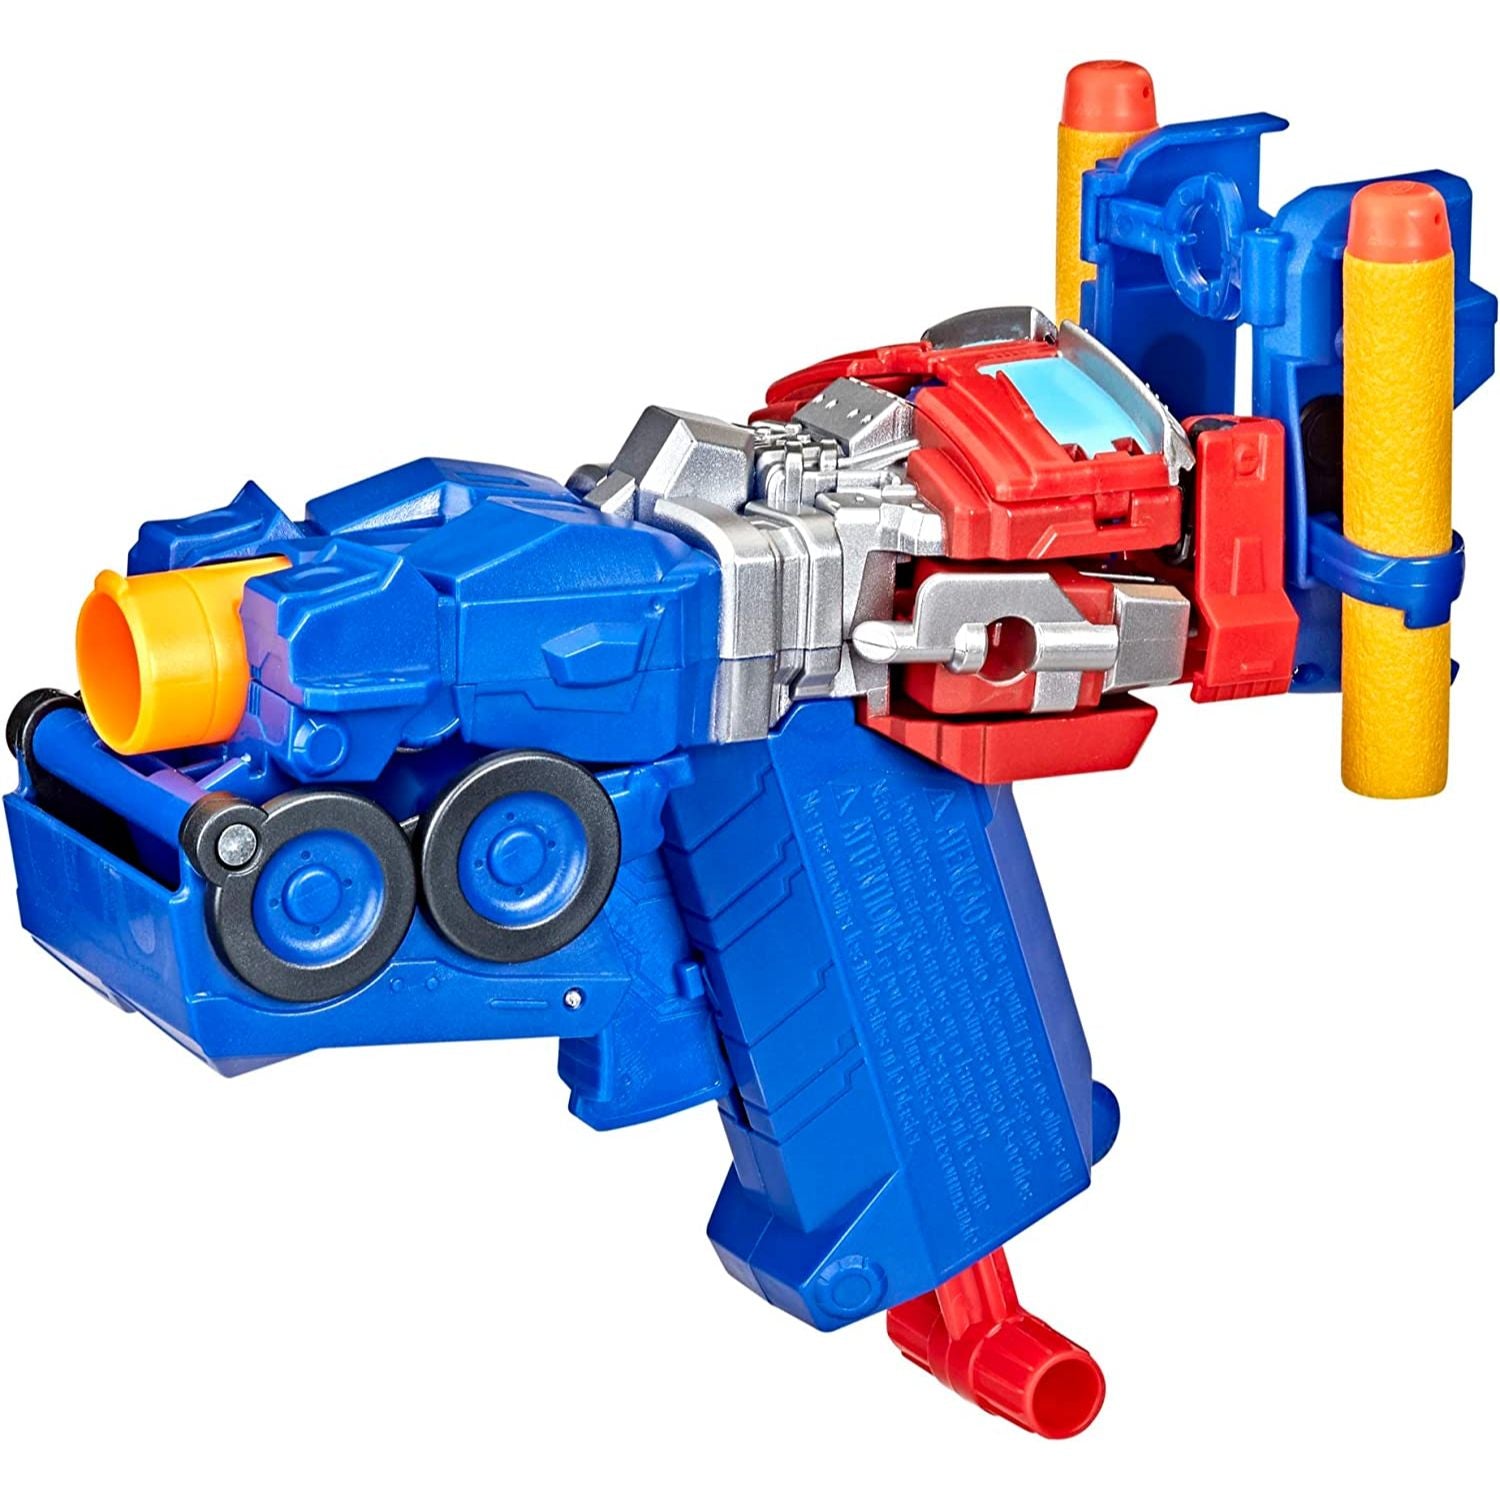 Transformers Toys Rise of The Beasts Movie 2-in-1 Optimus Prime Blaster Powered by Nerf for Ages 6 and Up, 7-inch